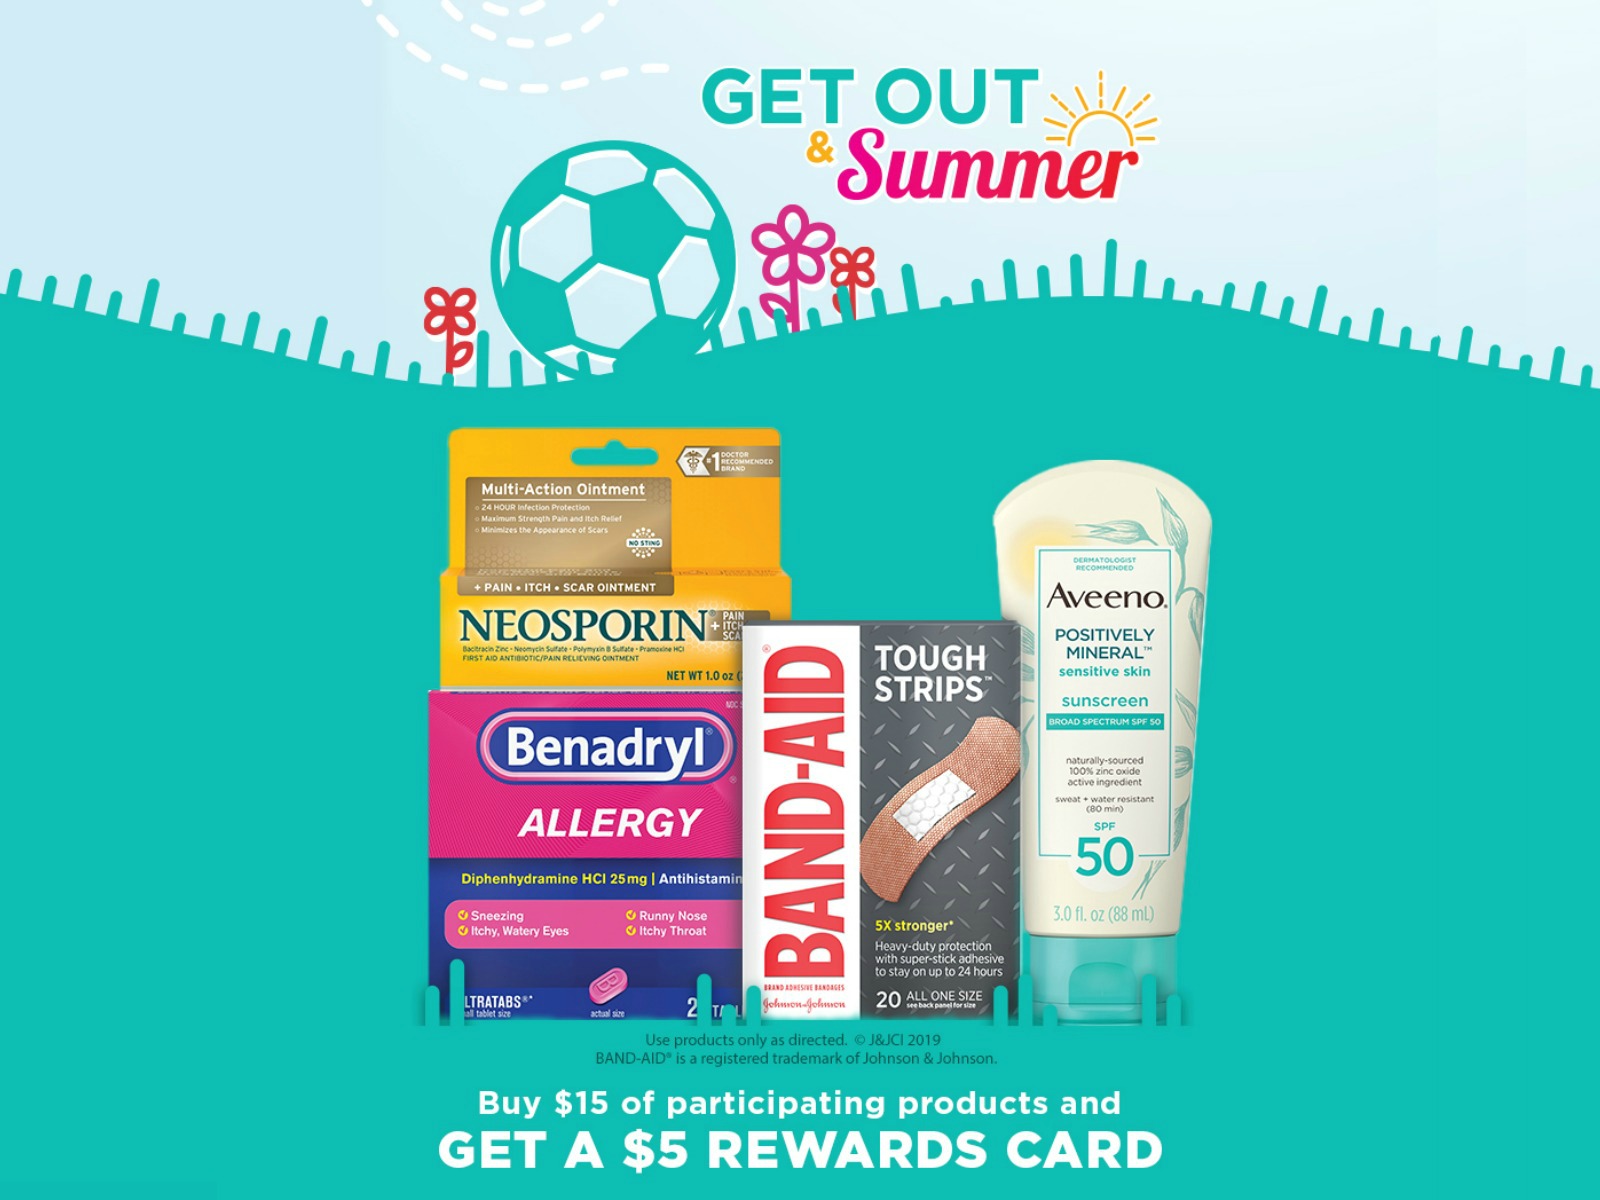 Earn A $5 Reward Card With The Get Out & Summer Promotion